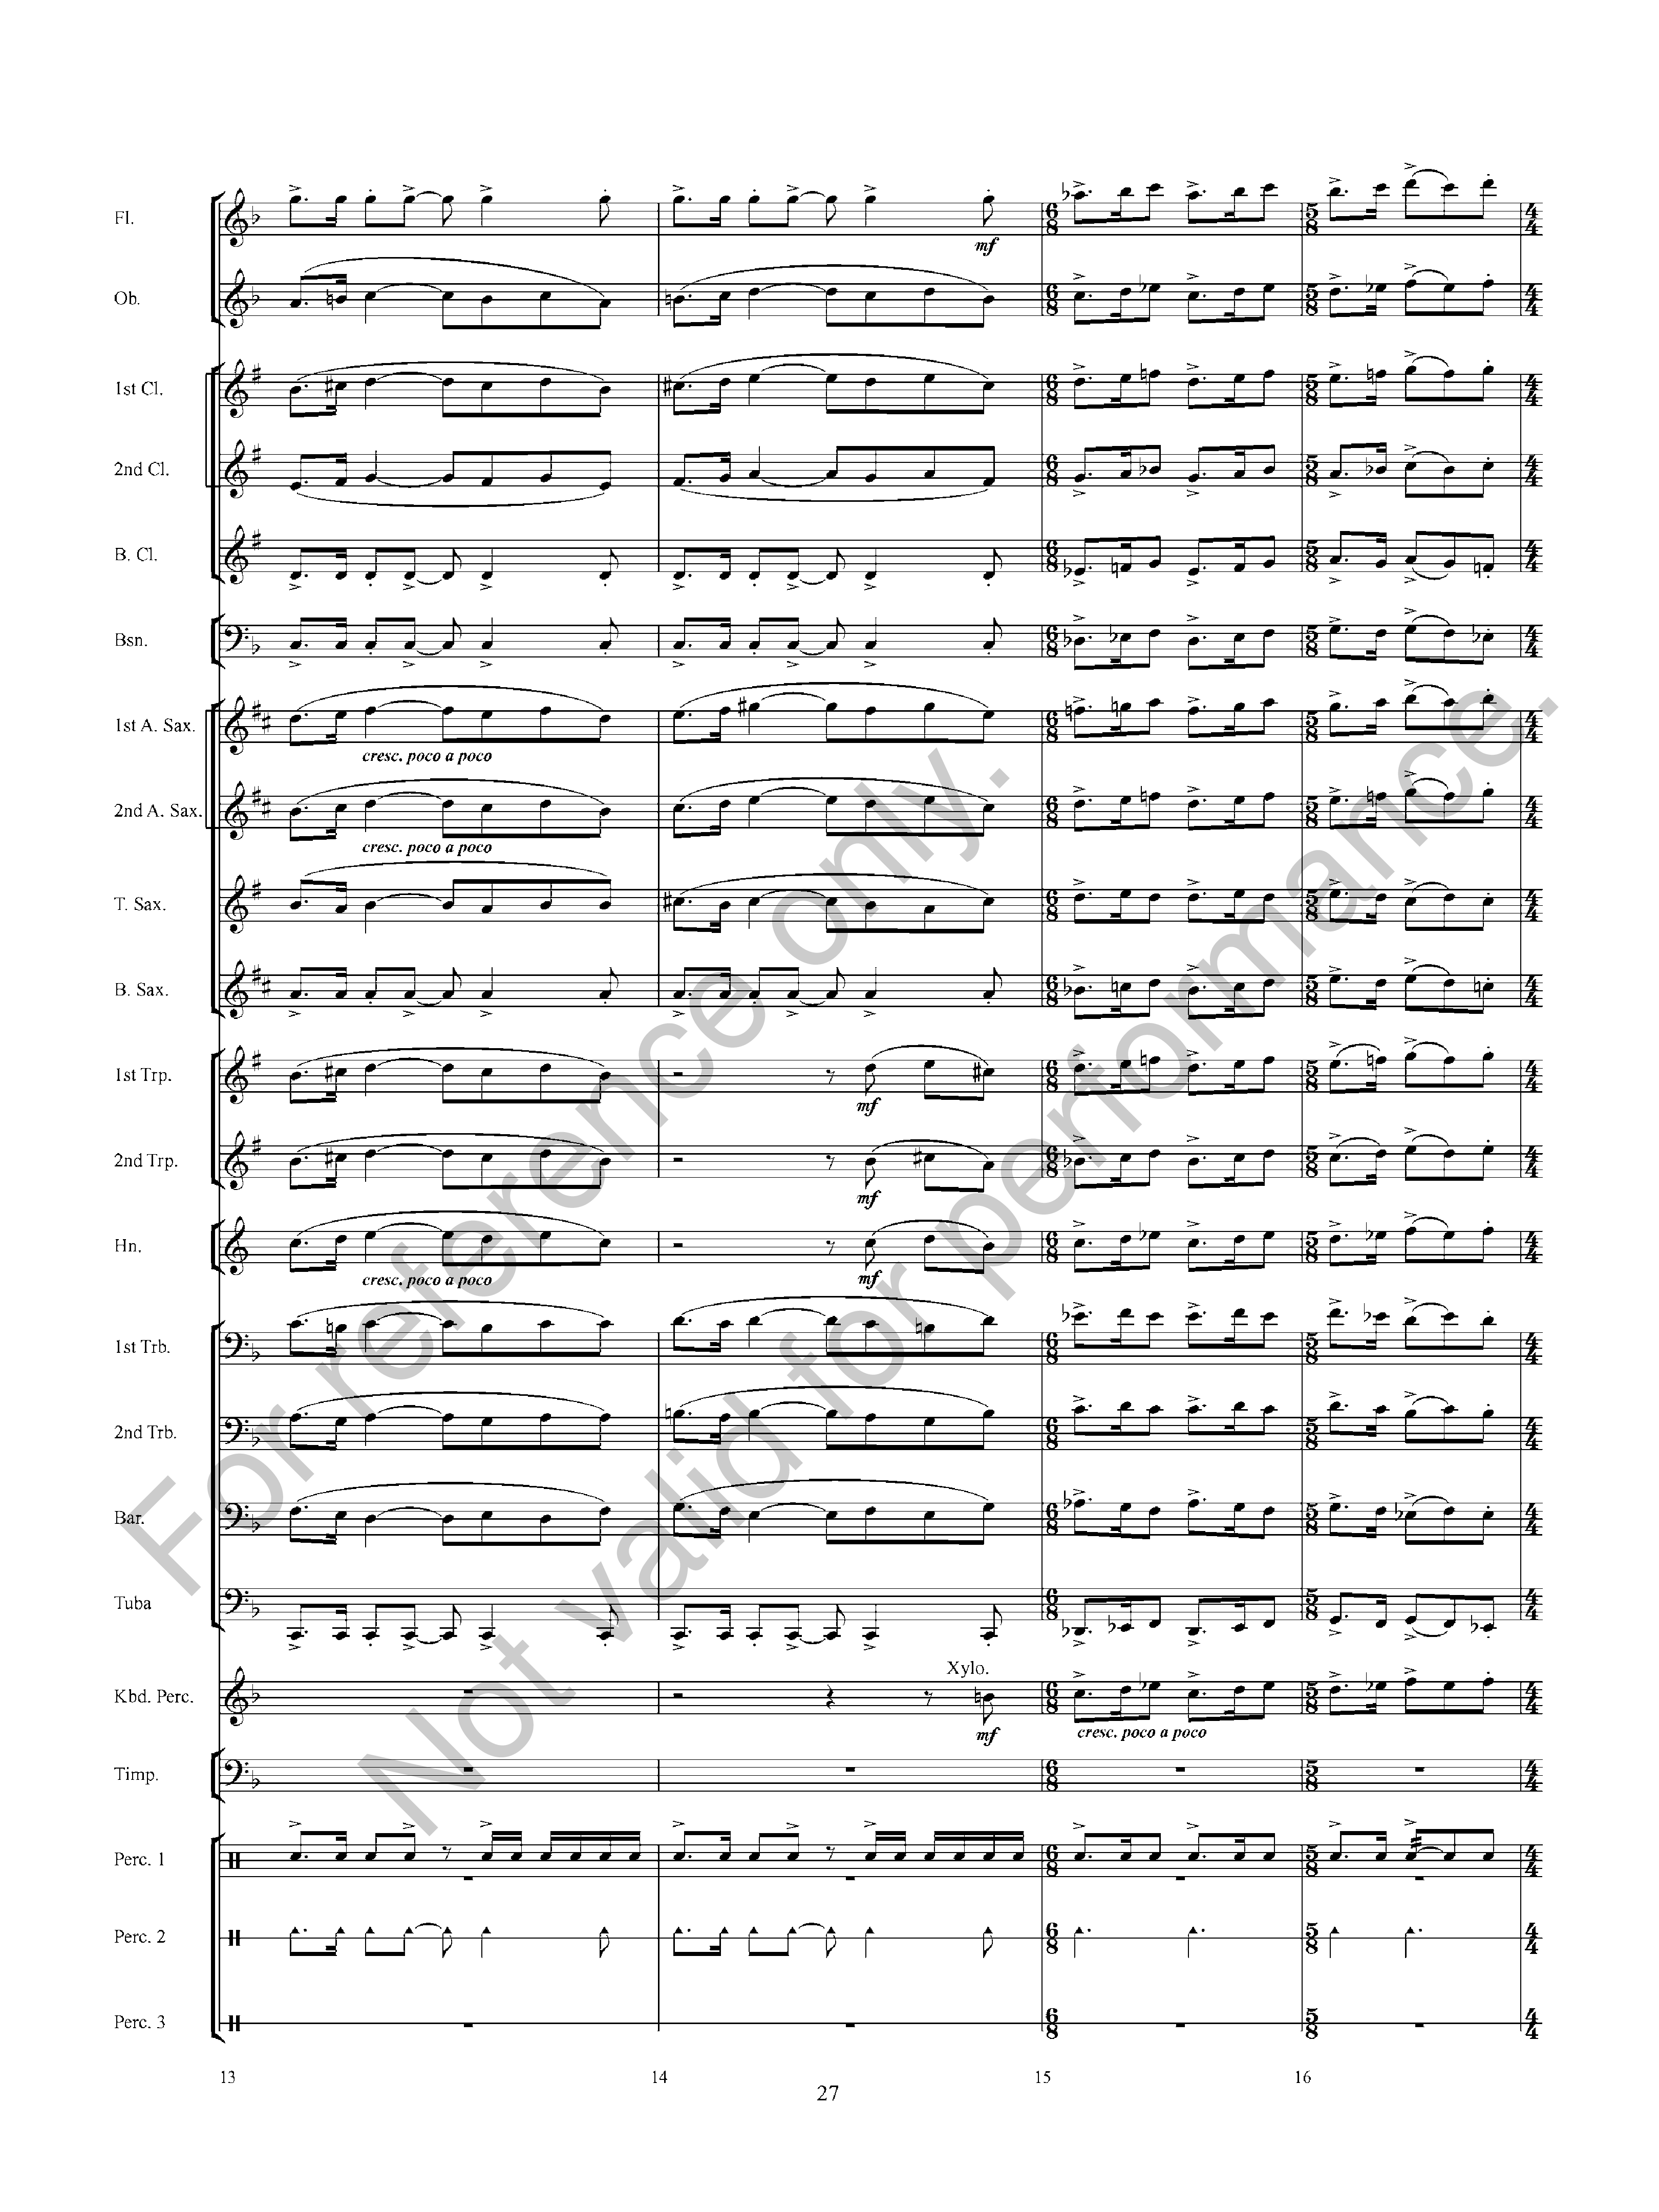 Sightreading 301 End of Instruction Assessment Pack